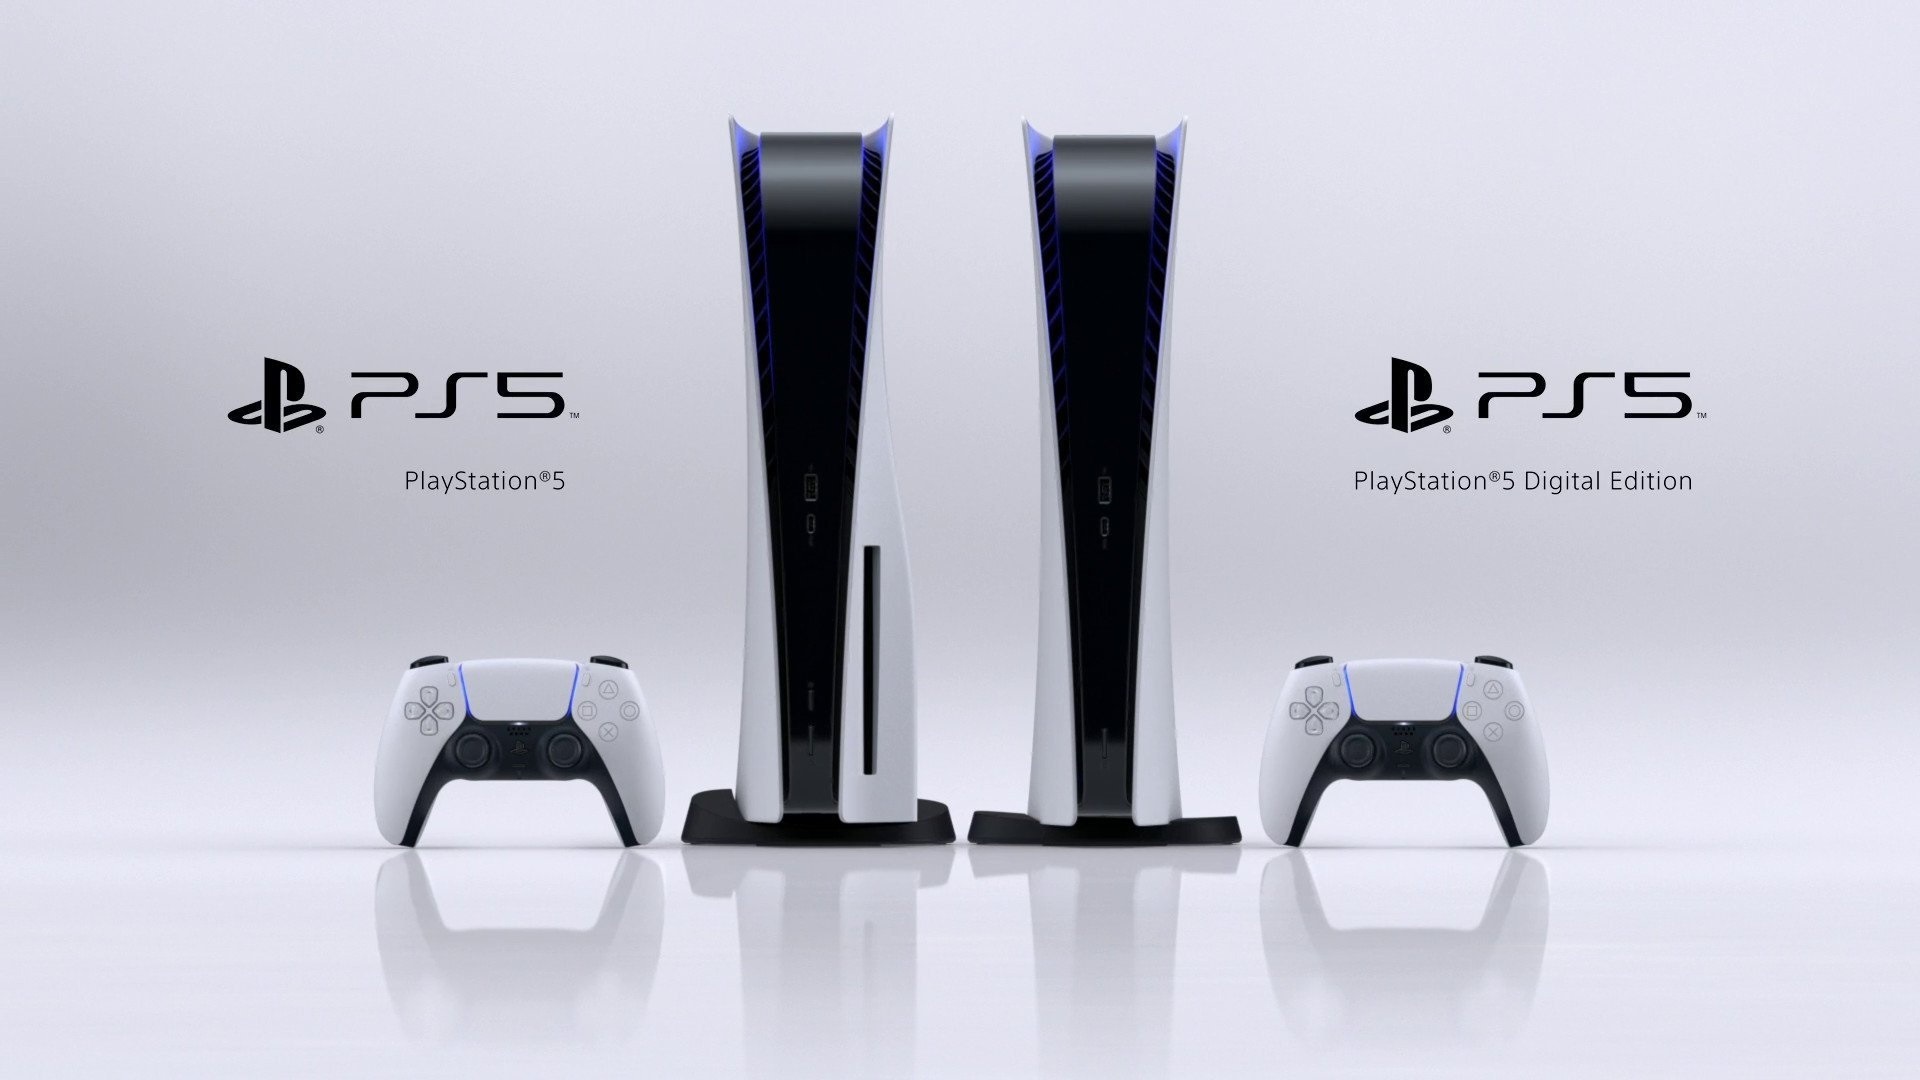 Hardware comparison of two PlayStation 5 models